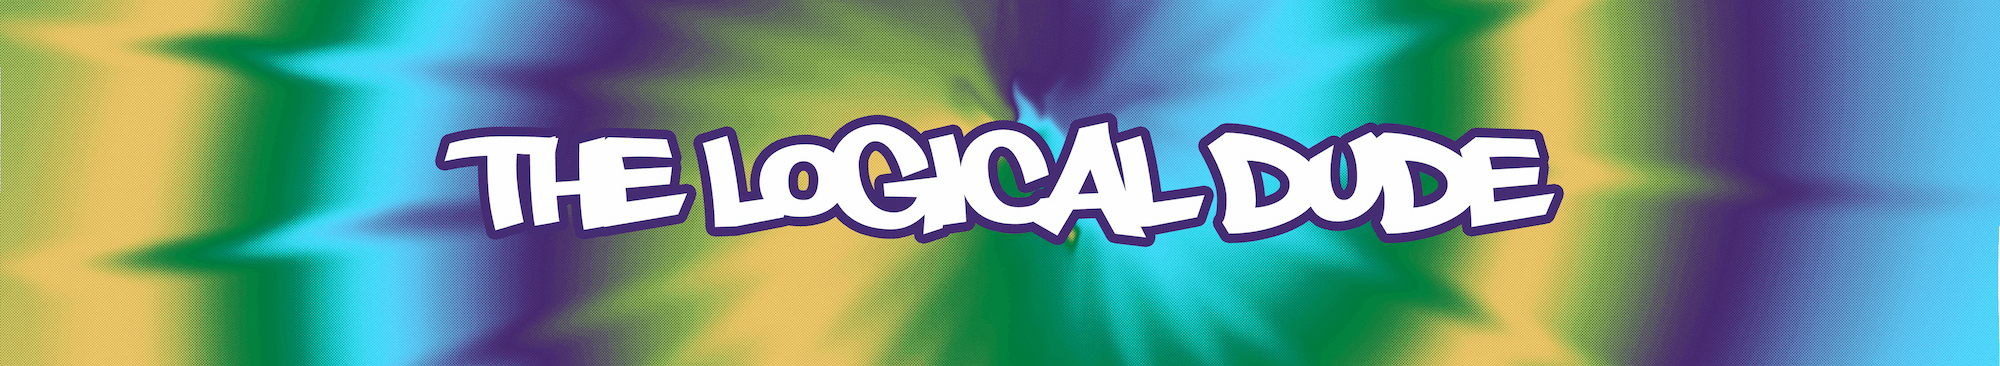 TheLogicalDAO banner